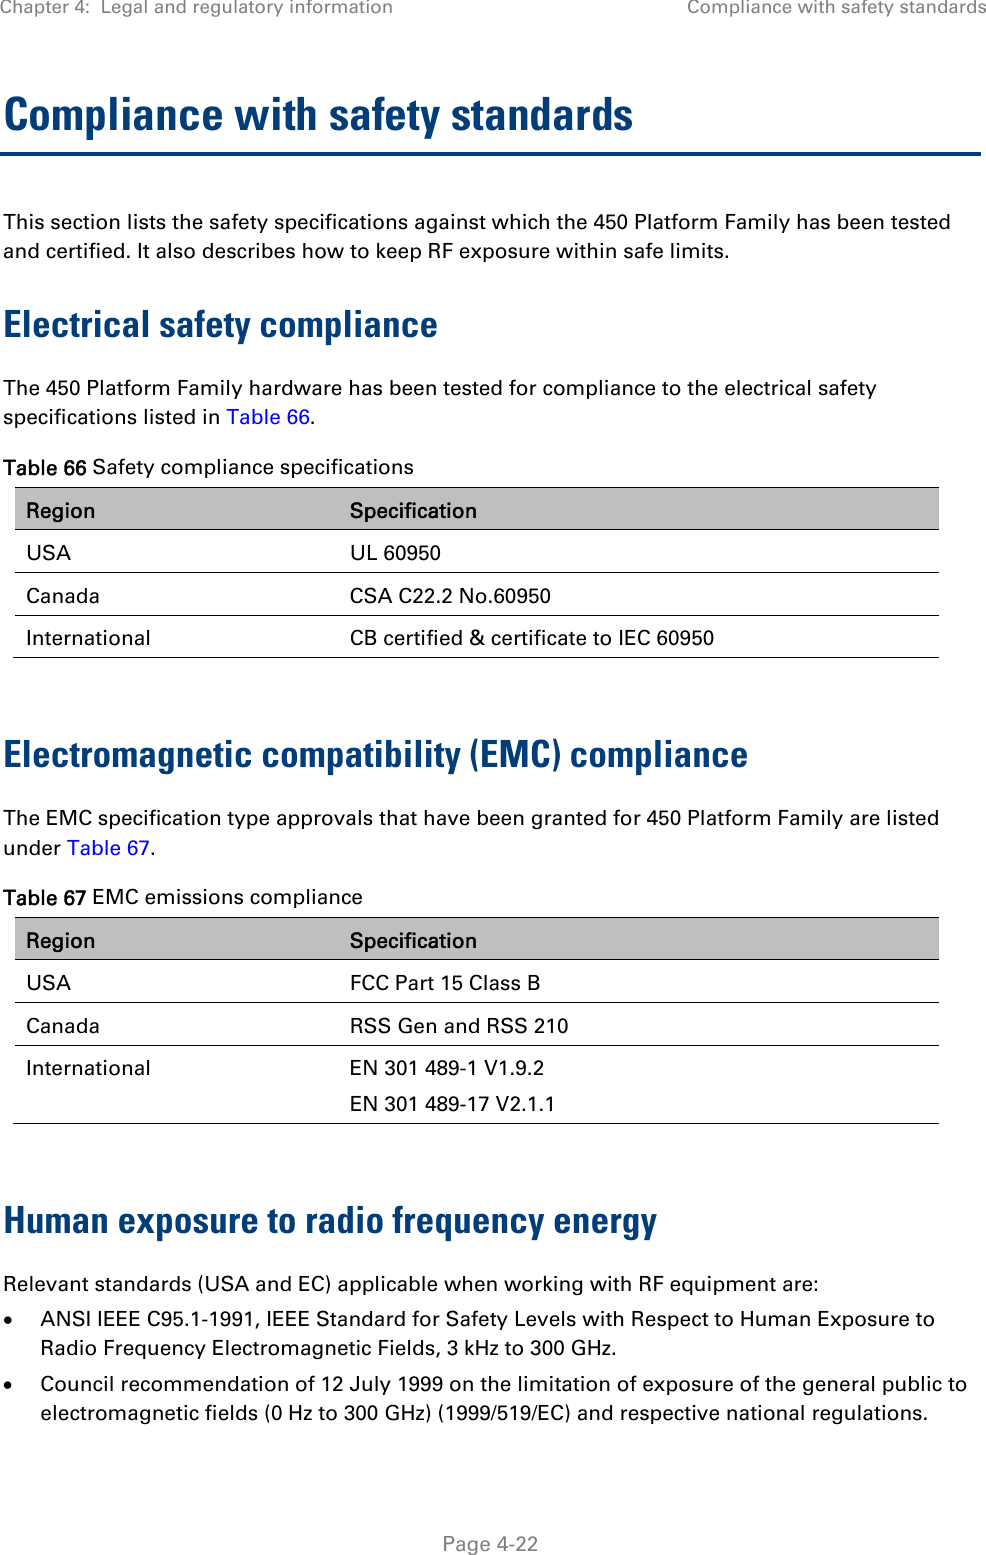 Chapter 4:  Legal and regulatory information  Compliance with safety standards   Page 4-22 Compliance with safety standards This section lists the safety specifications against which the 450 Platform Family has been tested and certified. It also describes how to keep RF exposure within safe limits. Electrical safety compliance  The 450 Platform Family hardware has been tested for compliance to the electrical safety specifications listed in Table 66. Table 66 Safety compliance specifications Region  Specification USA UL 60950 Canada  CSA C22.2 No.60950 International  CB certified &amp; certificate to IEC 60950  Electromagnetic compatibility (EMC) compliance The EMC specification type approvals that have been granted for 450 Platform Family are listed under Table 67. Table 67 EMC emissions compliance Region  Specification USA  FCC Part 15 Class B Canada  RSS Gen and RSS 210 International  EN 301 489-1 V1.9.2 EN 301 489-17 V2.1.1  Human exposure to radio frequency energy Relevant standards (USA and EC) applicable when working with RF equipment are:  ANSI IEEE C95.1-1991, IEEE Standard for Safety Levels with Respect to Human Exposure to Radio Frequency Electromagnetic Fields, 3 kHz to 300 GHz.  Council recommendation of 12 July 1999 on the limitation of exposure of the general public to electromagnetic fields (0 Hz to 300 GHz) (1999/519/EC) and respective national regulations. 